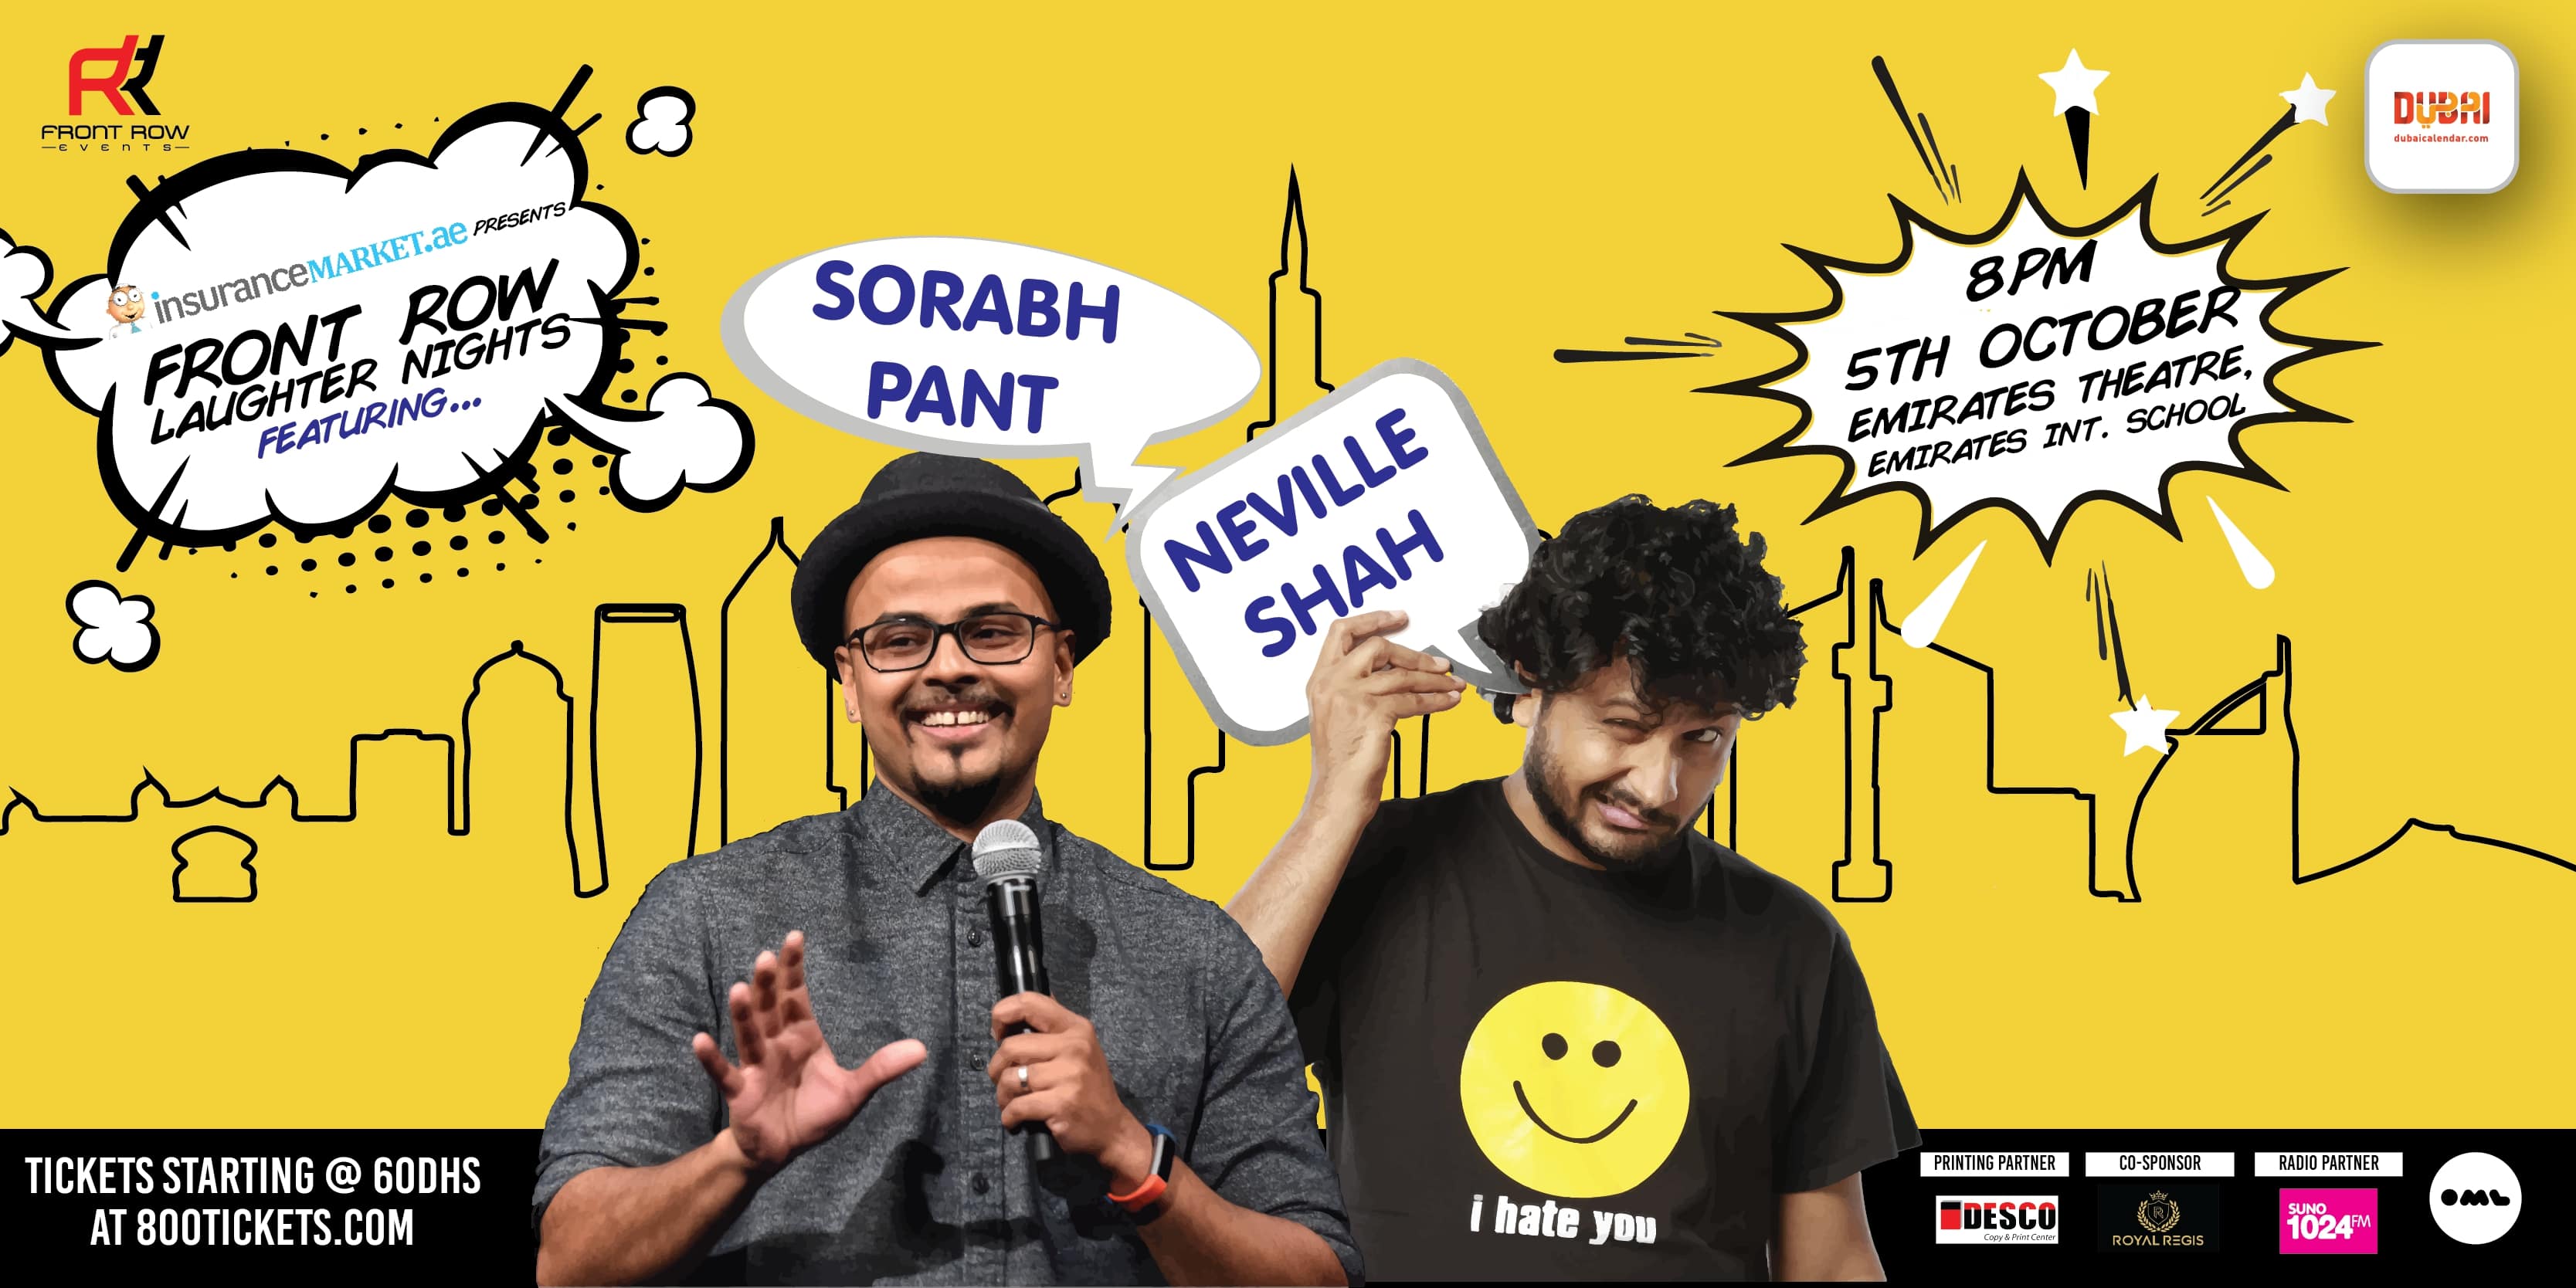 Insurancemarket.ae presents Front Row Laughter Nights ft Neville Shah and Sorabh Pant